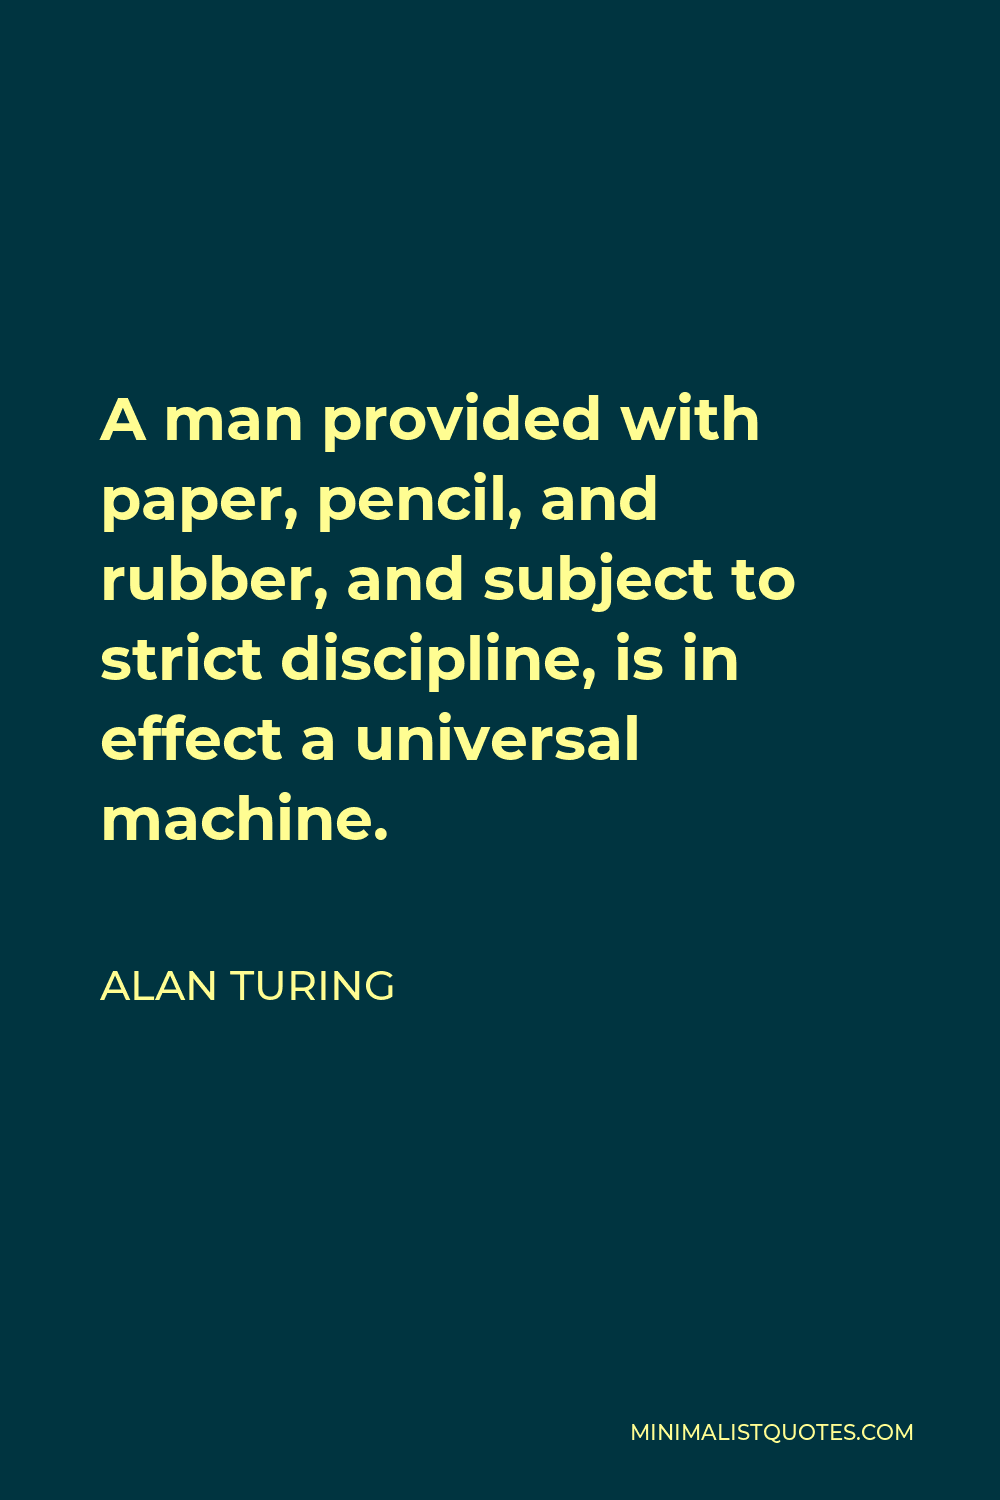 Alan Turing Quote - A man provided with paper, pencil, and rubber, and subject to strict discipline, is in effect a universal machine.